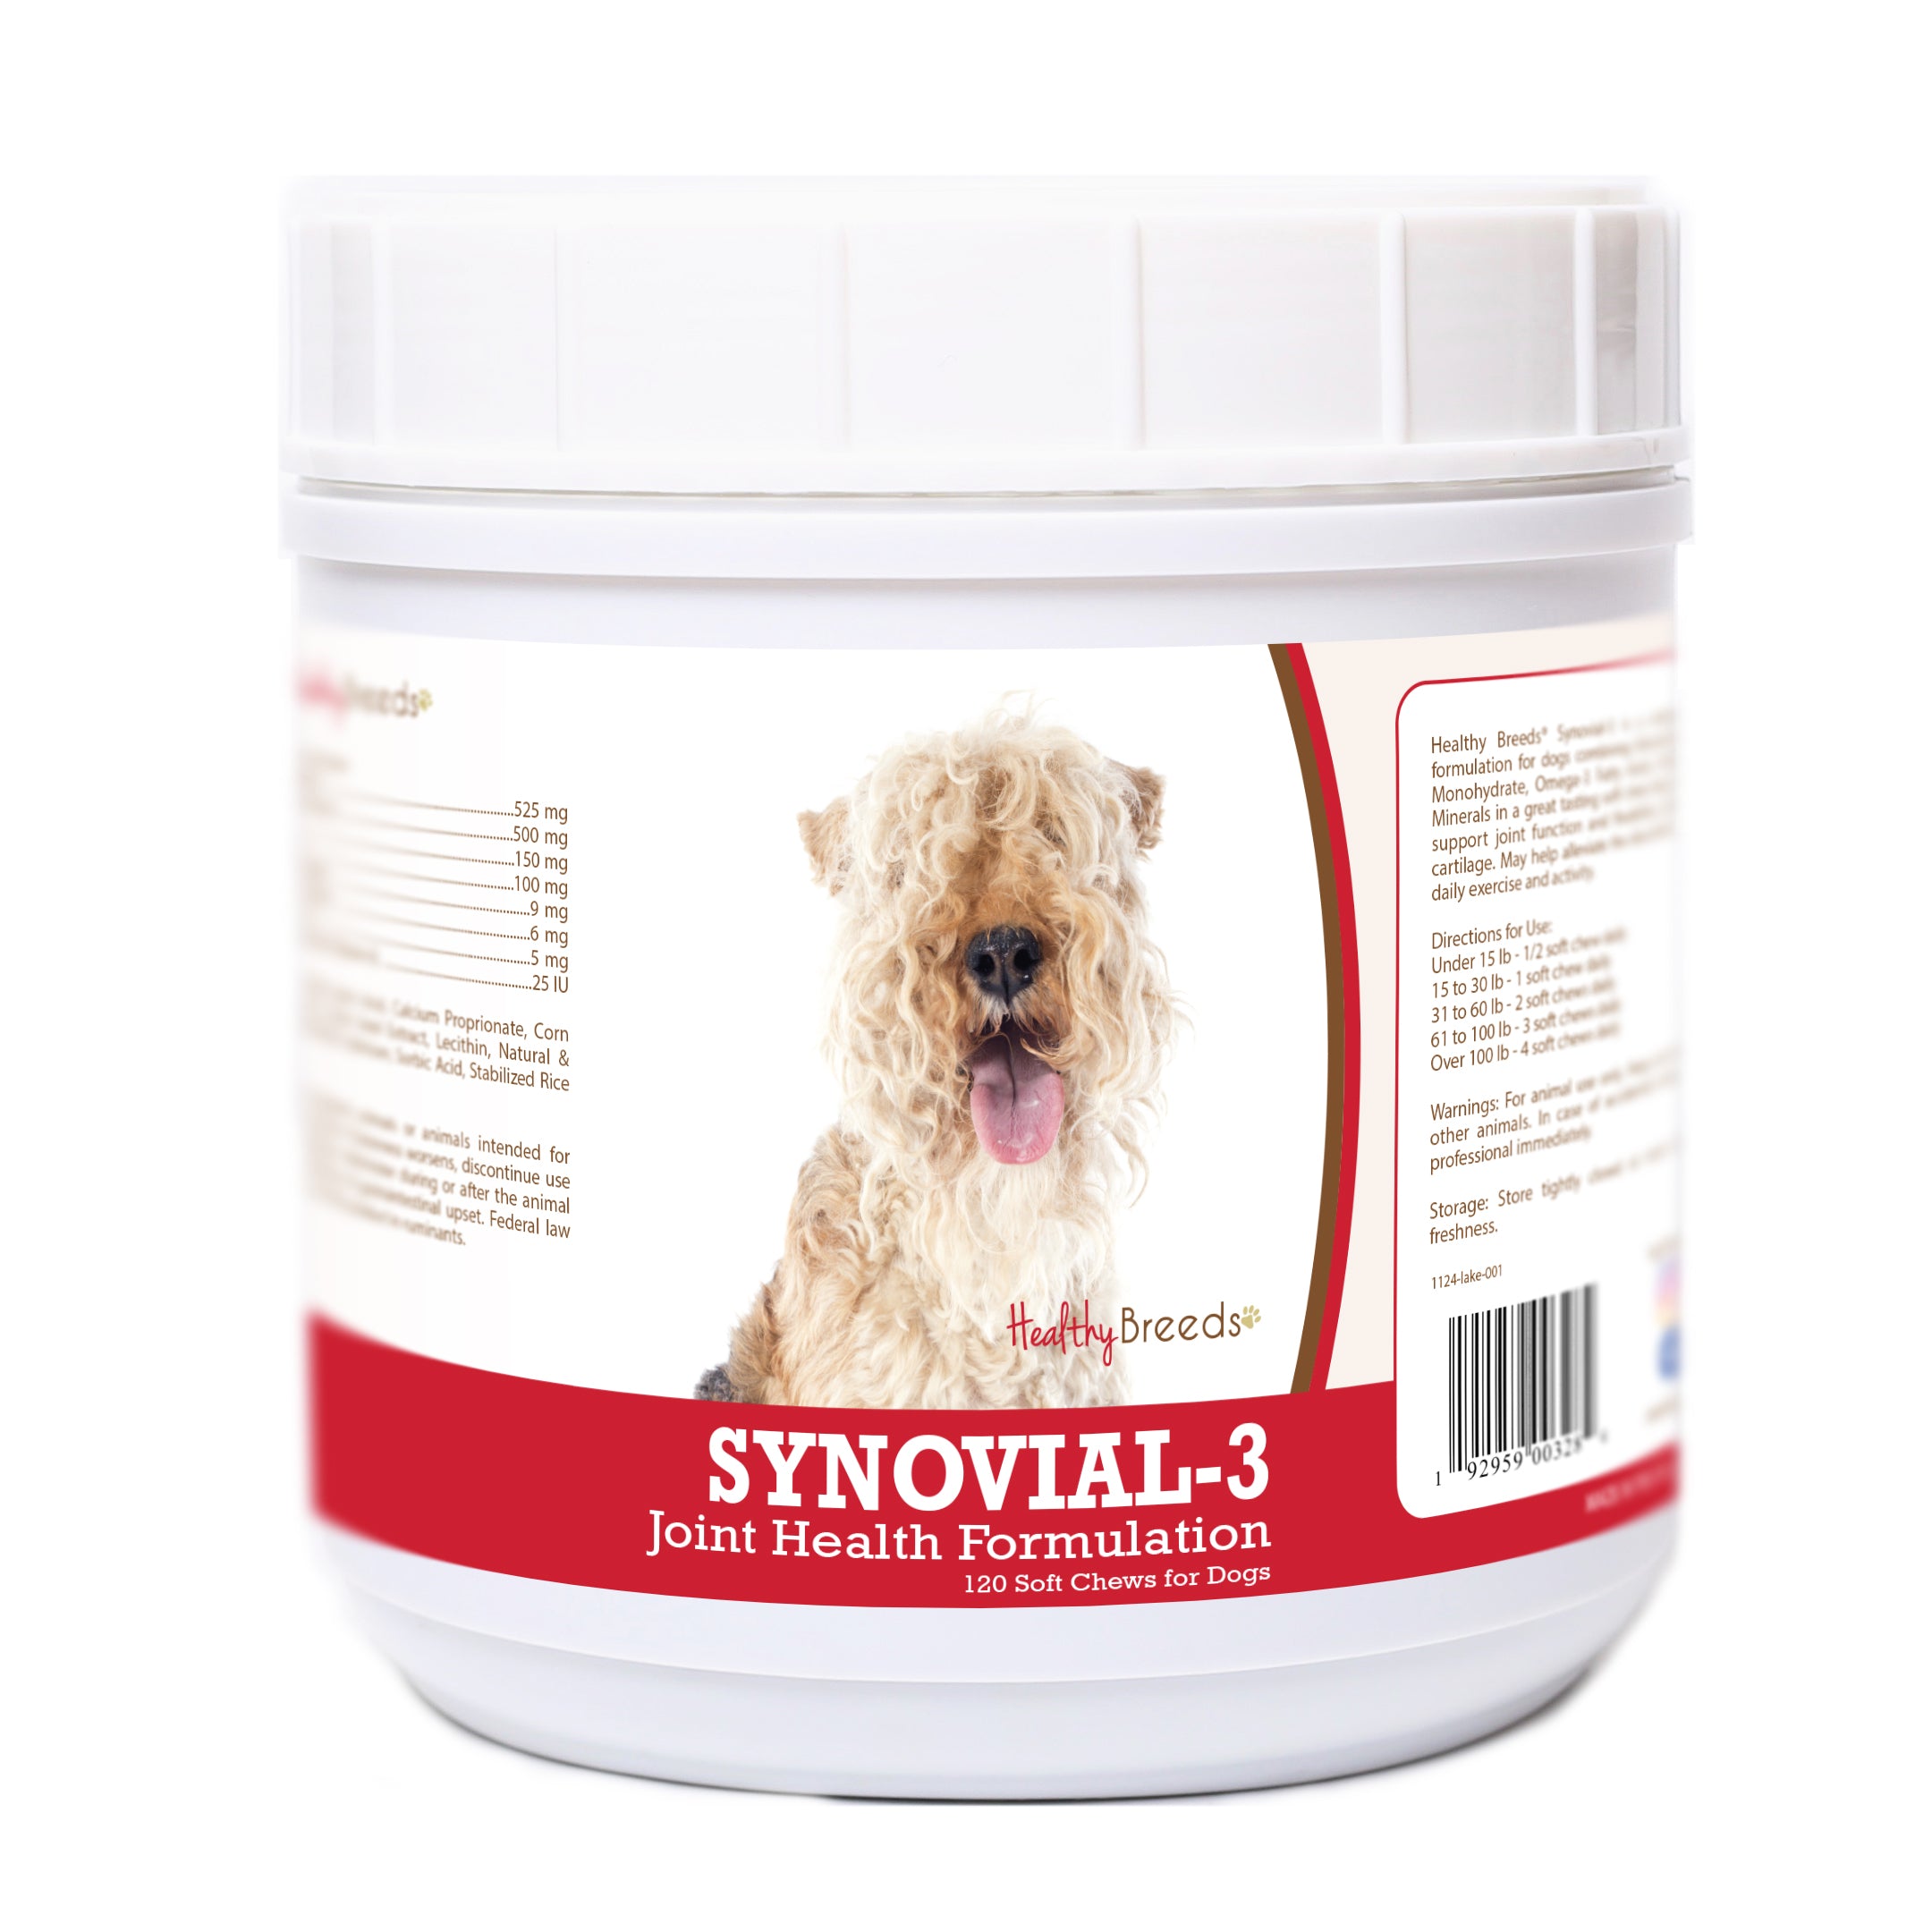 Lakeland Terrier Synovial-3 Joint Health Formulation Soft Chews 120 Count